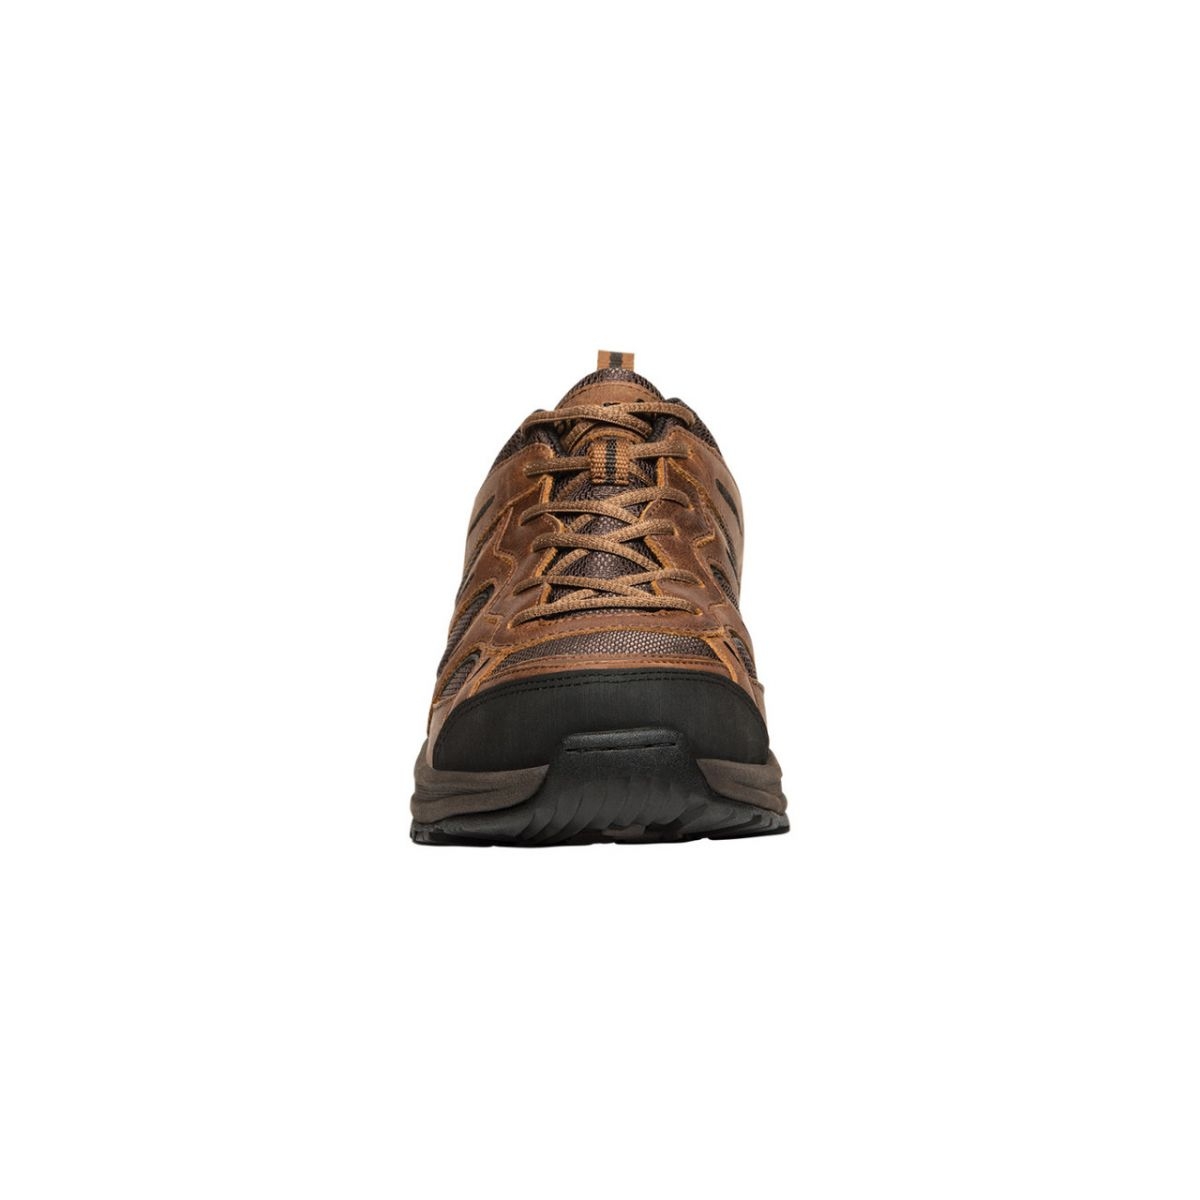 Propet Men's Connelly Hiking Shoe Brown - M5503BR BROWN - BROWN, 9-E